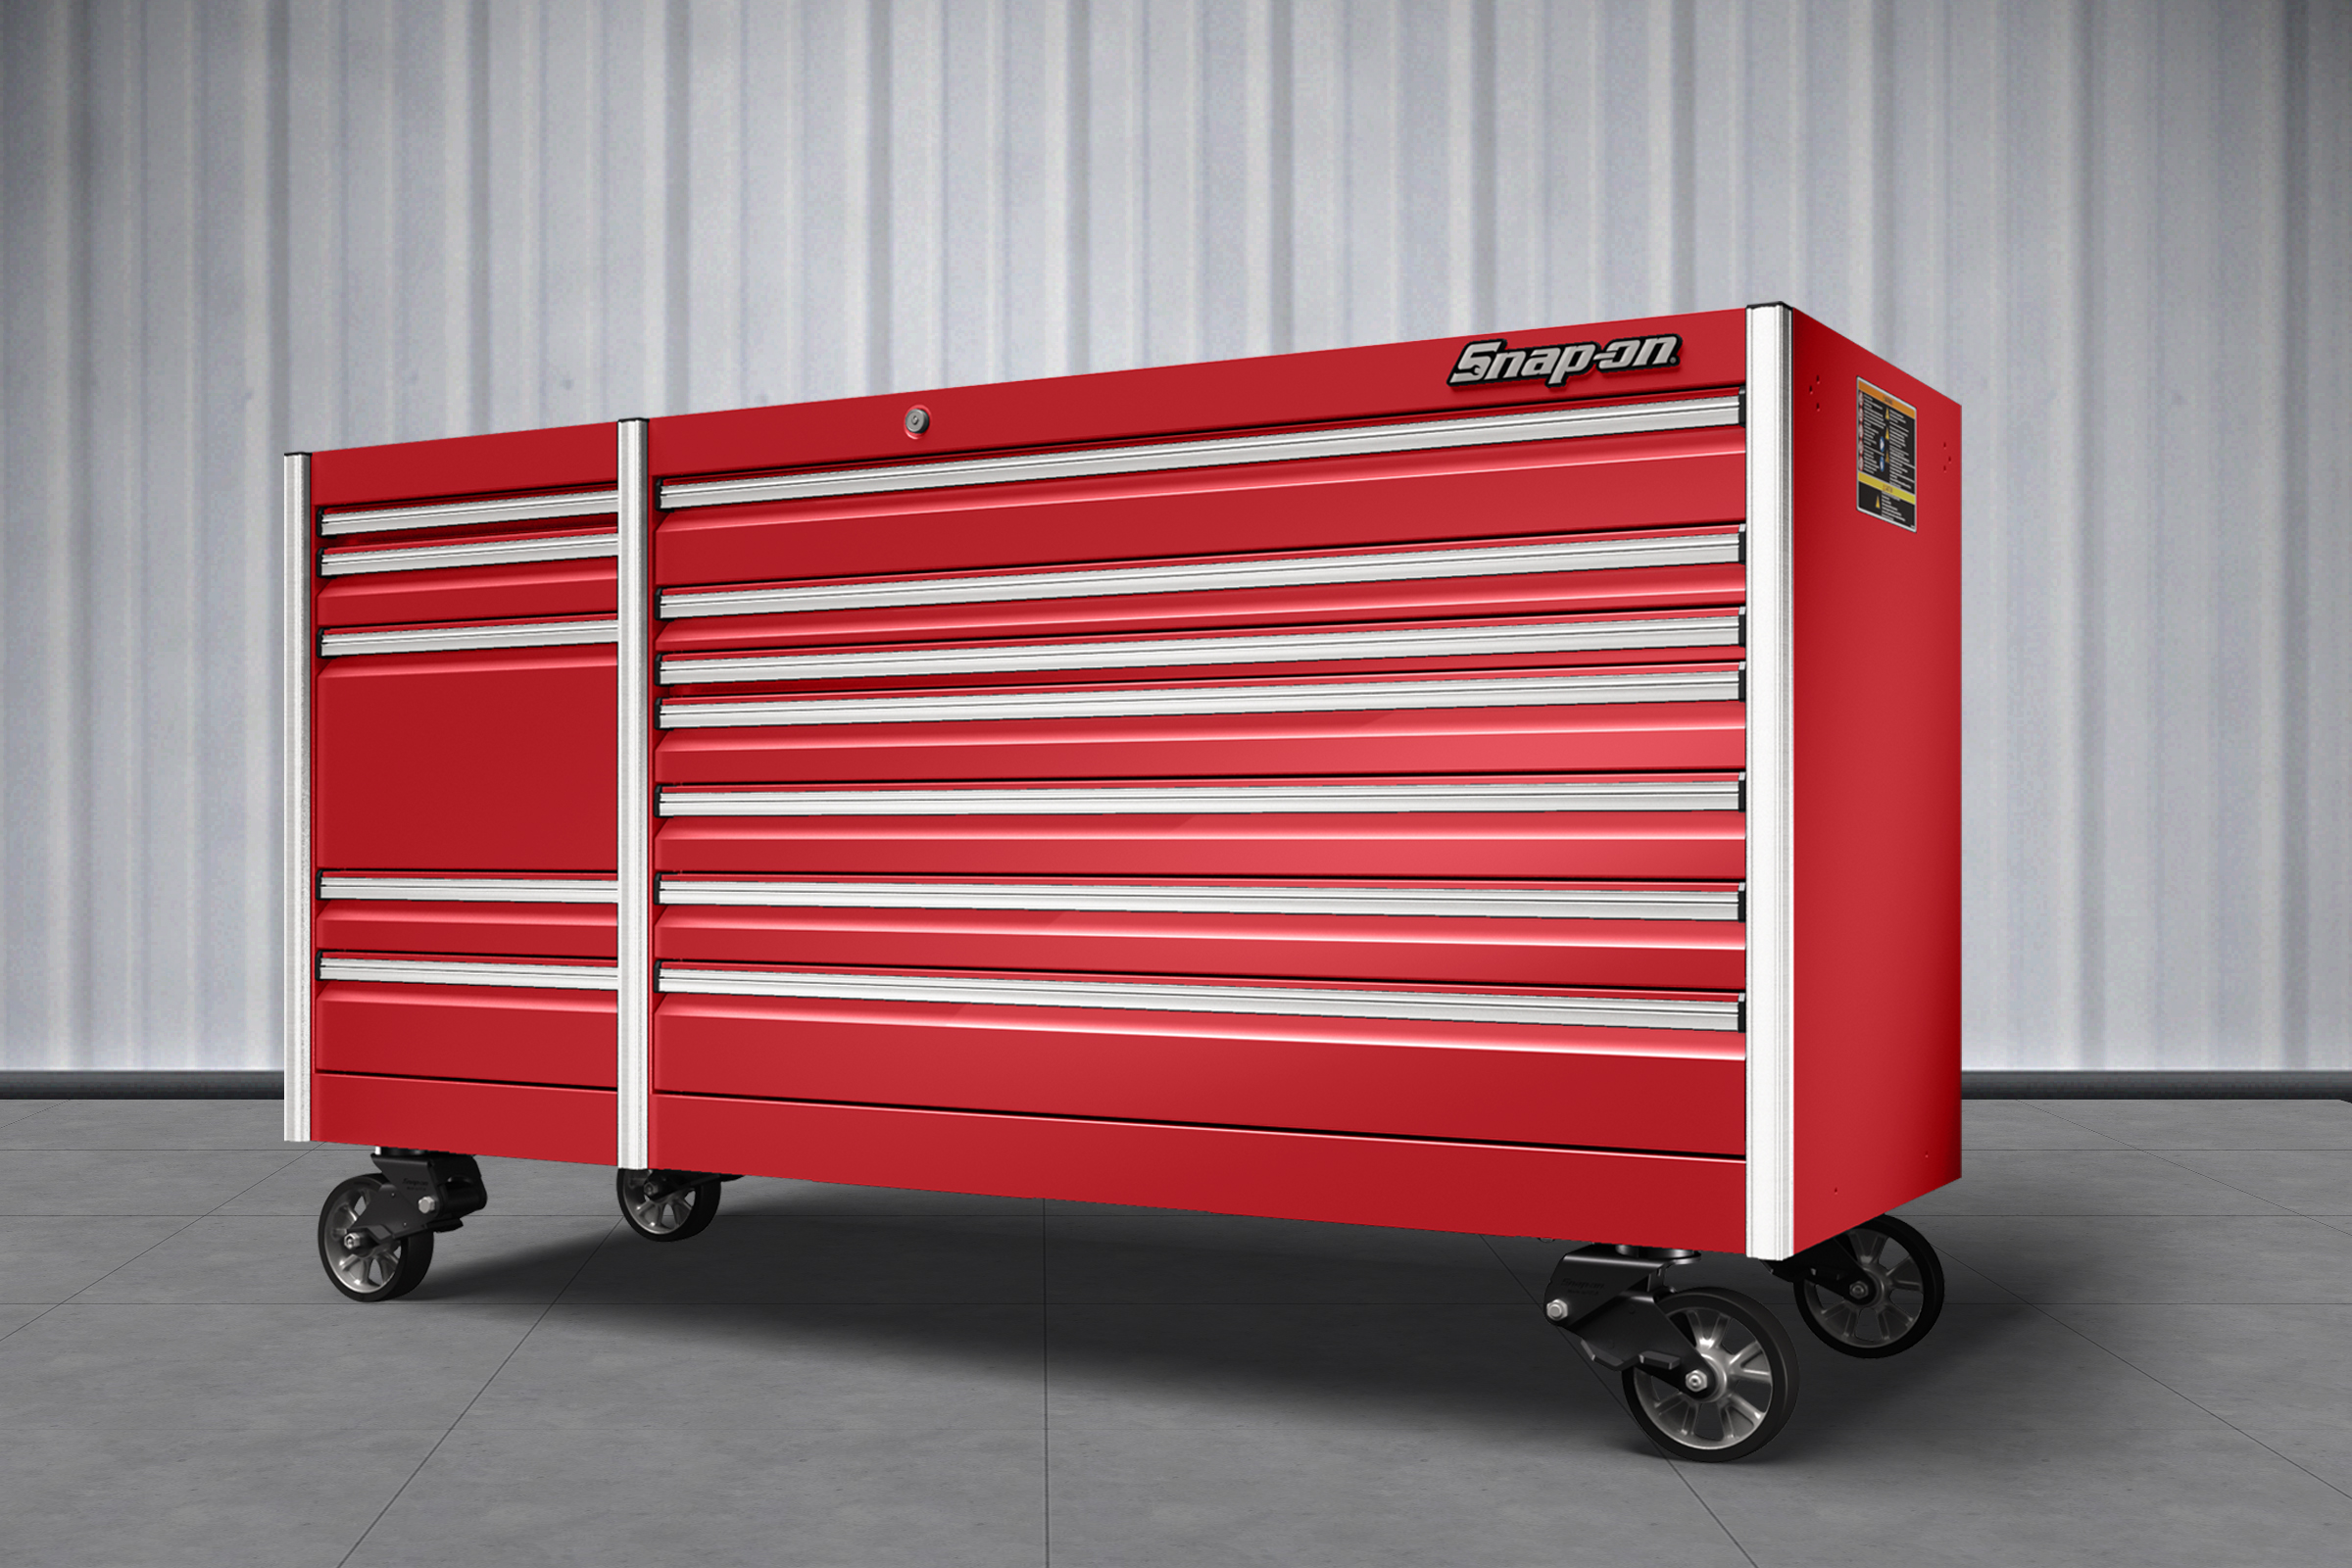 New Snap-on Tool Box Project  Rust Protection Update 